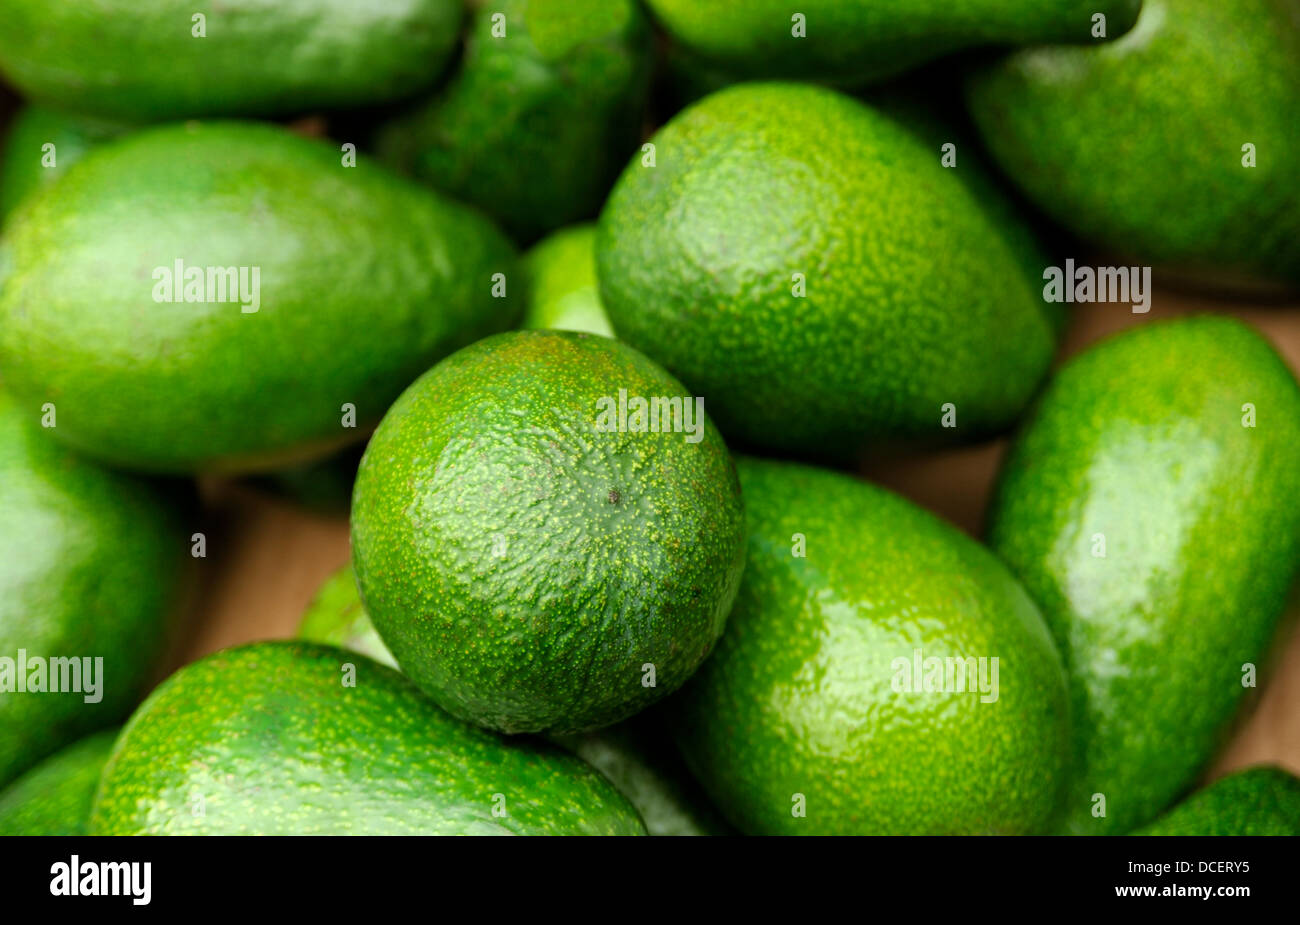 RIPE AVOCADOS FOR SALE ON A MARKET STALL Stock Photo